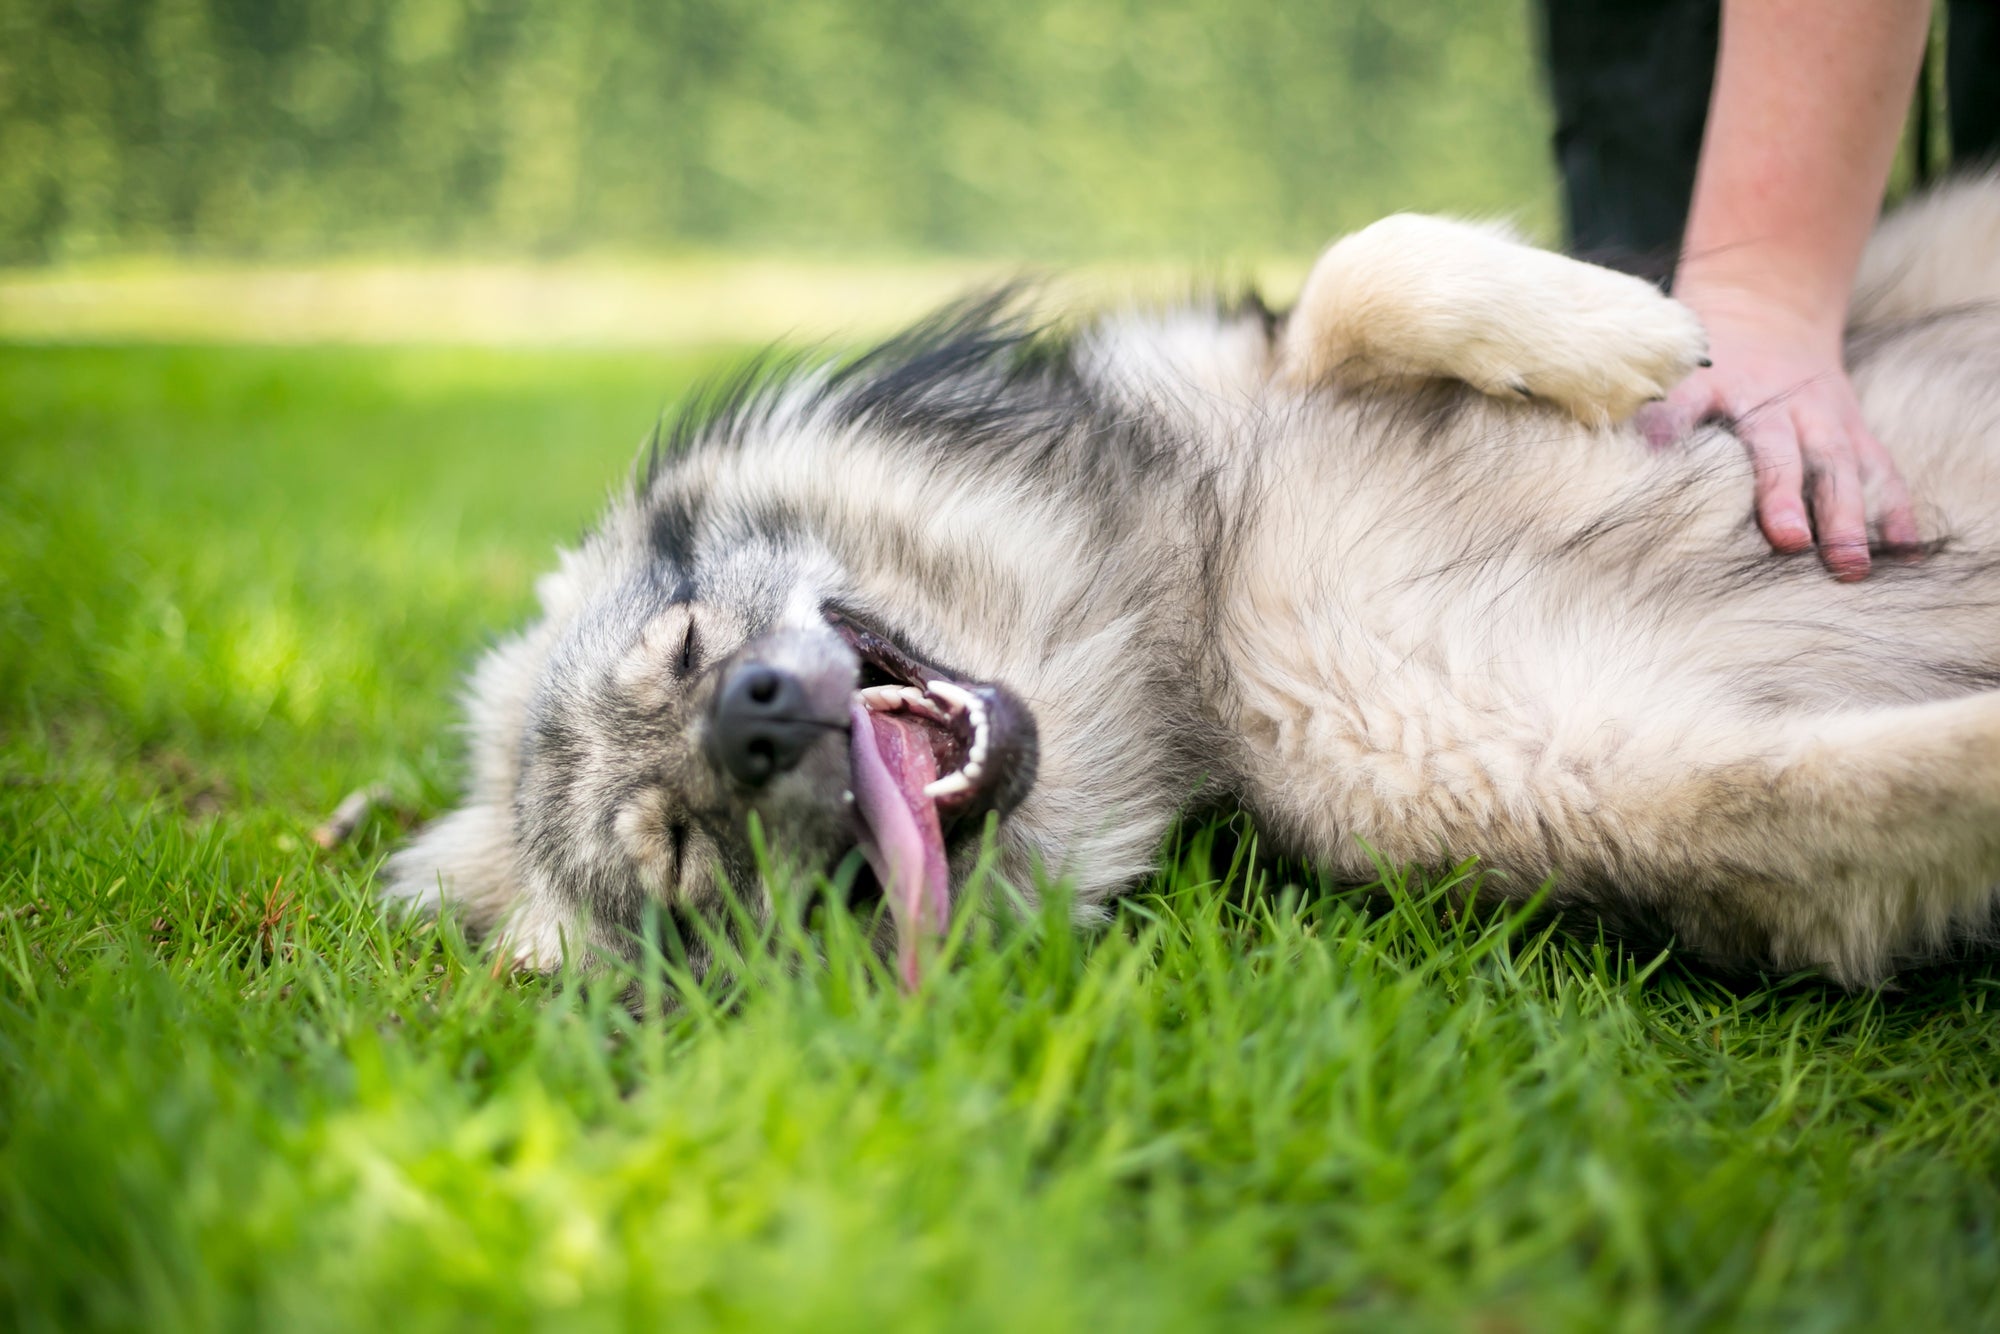 Gut Health For Pets: Tips & Tricks To Maintain A Healthy, Balanced Diet